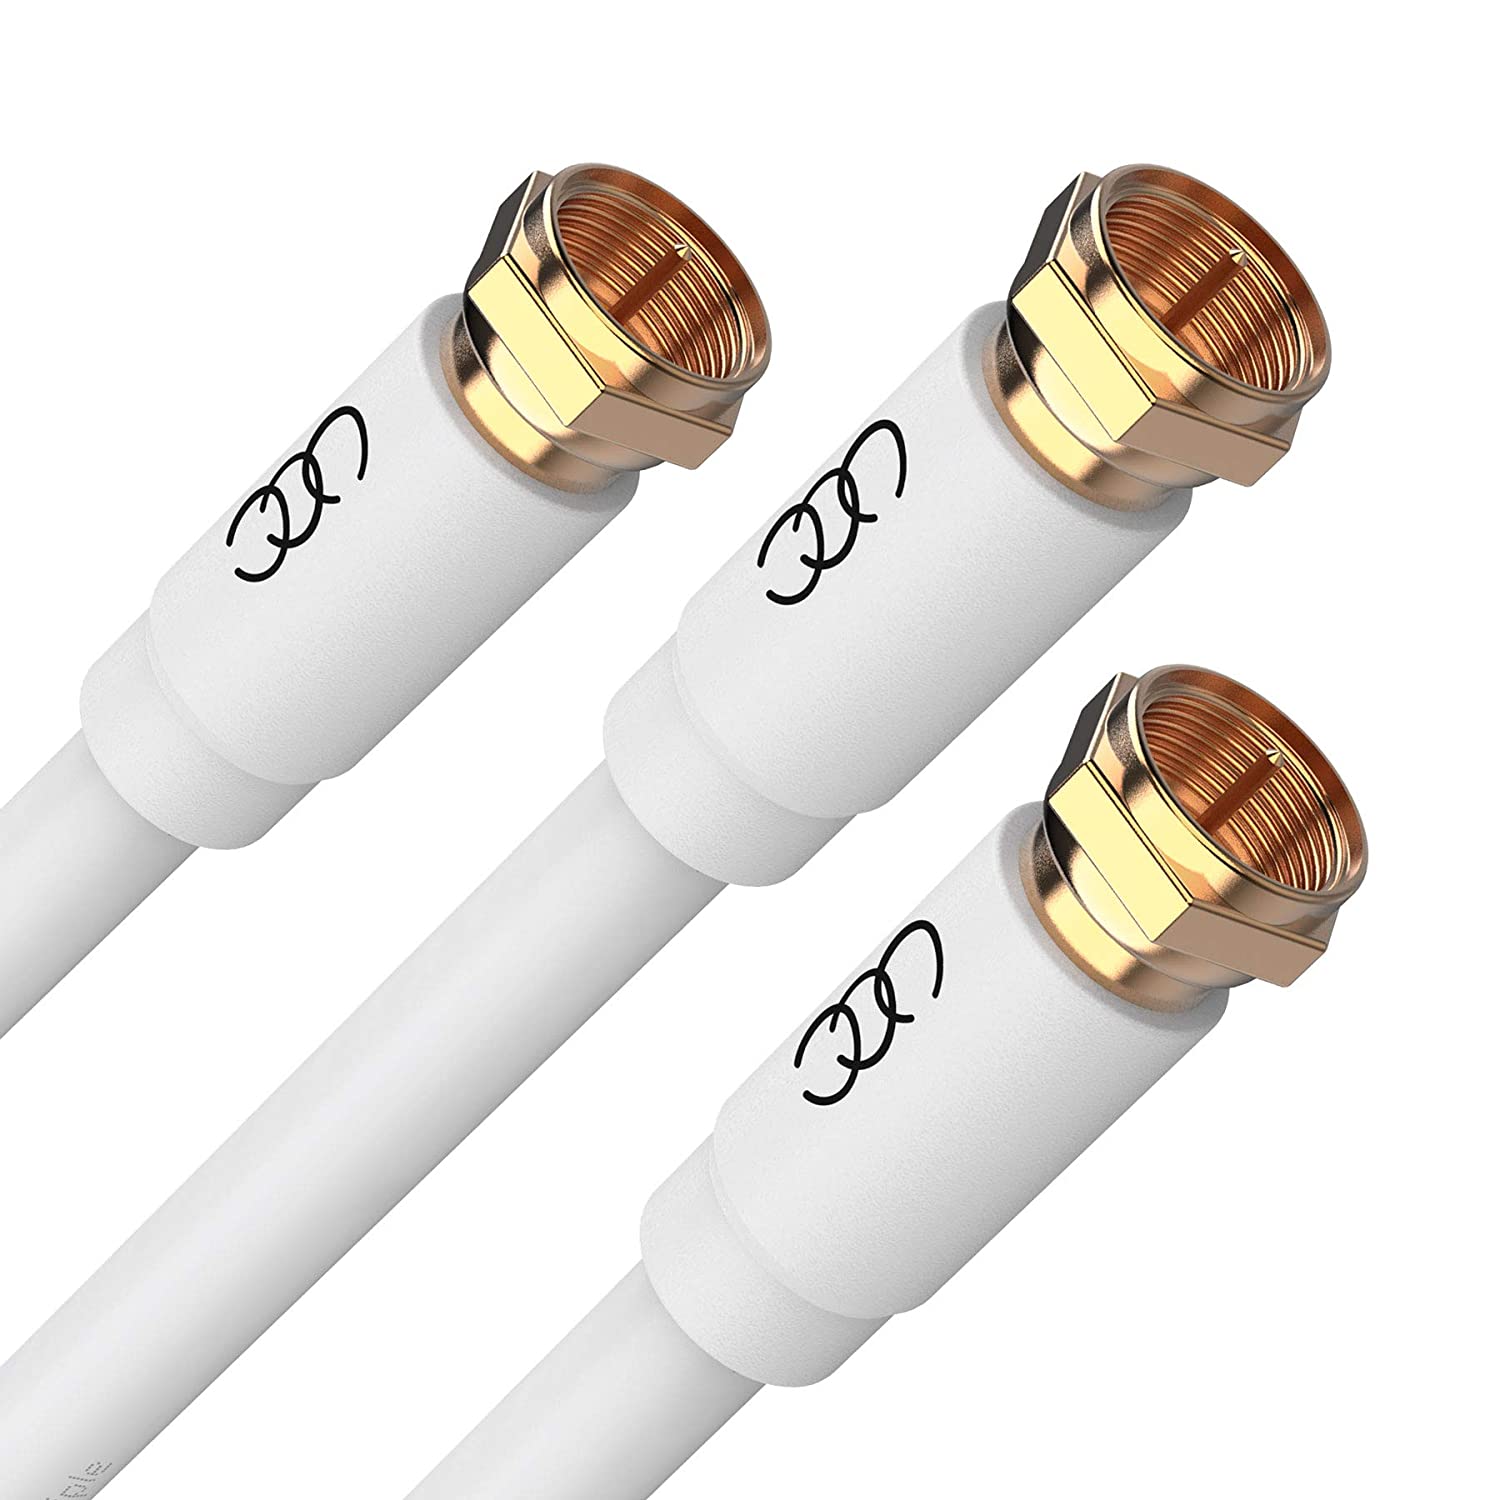 Buy Coaxial Cable 30ft (3 Pack) - Triple Shielded RG6 Coax TV Cable Cord  in-Wall Rated Gold Plated Connectors Digital Audio Video with Male F  Connector Pin (White) - 30 Feet Online